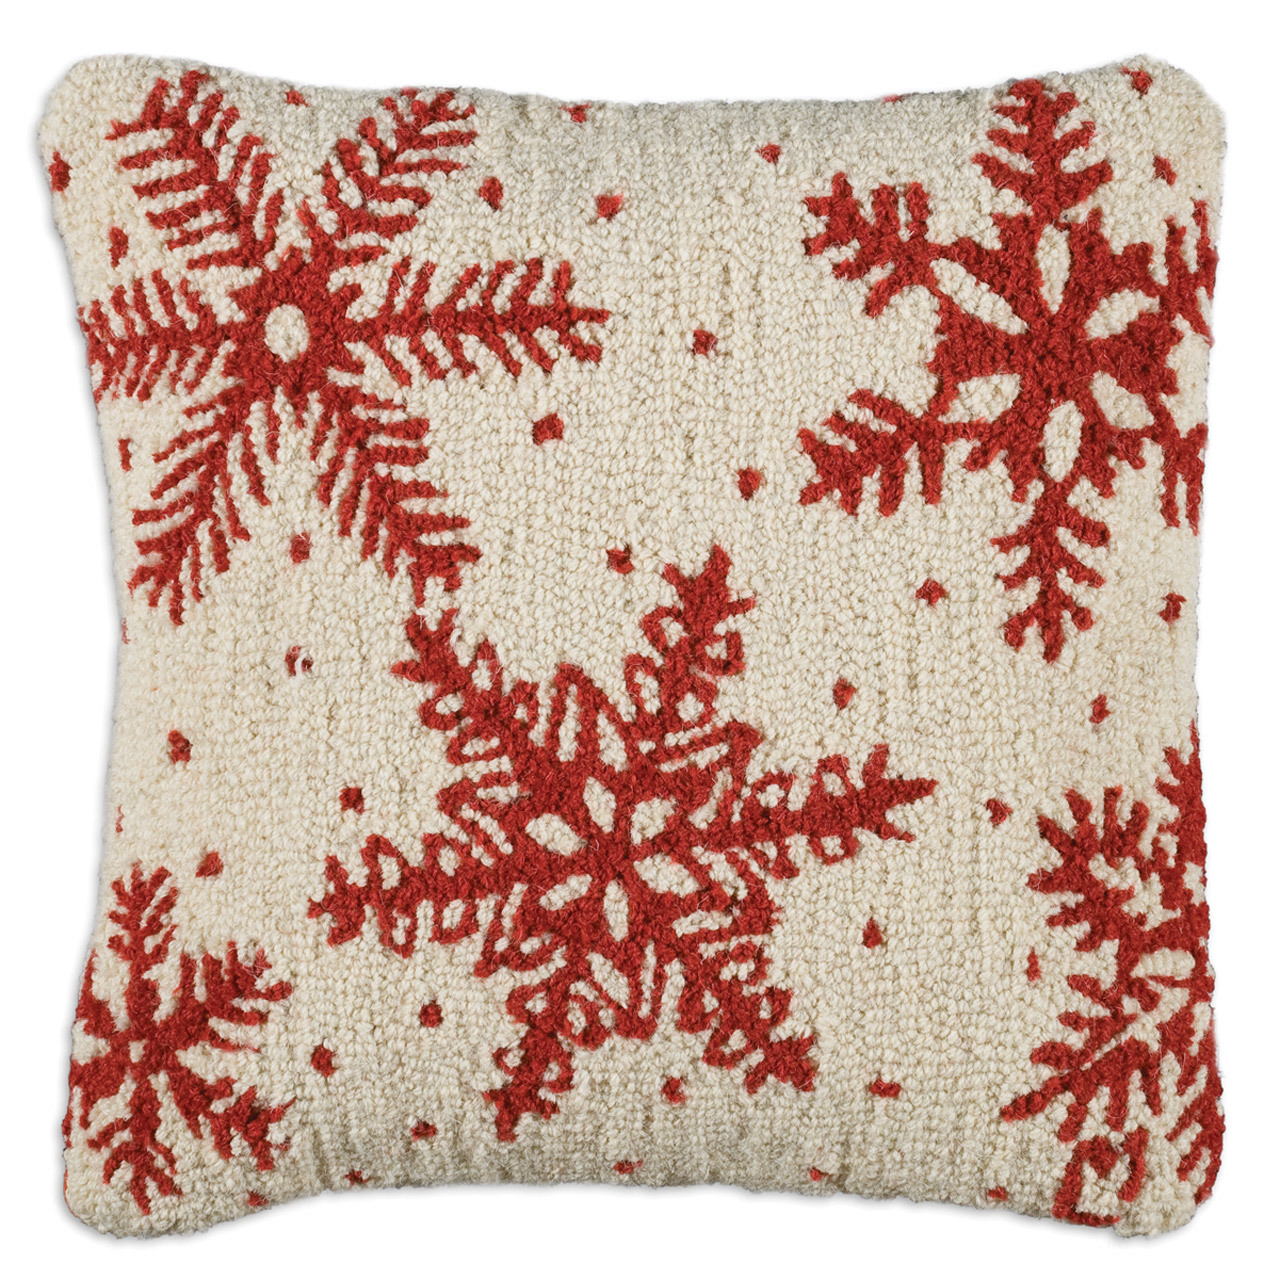 Santa Prefers Wine & Cheese - 18 x 18 inch Pillow – Livet Products